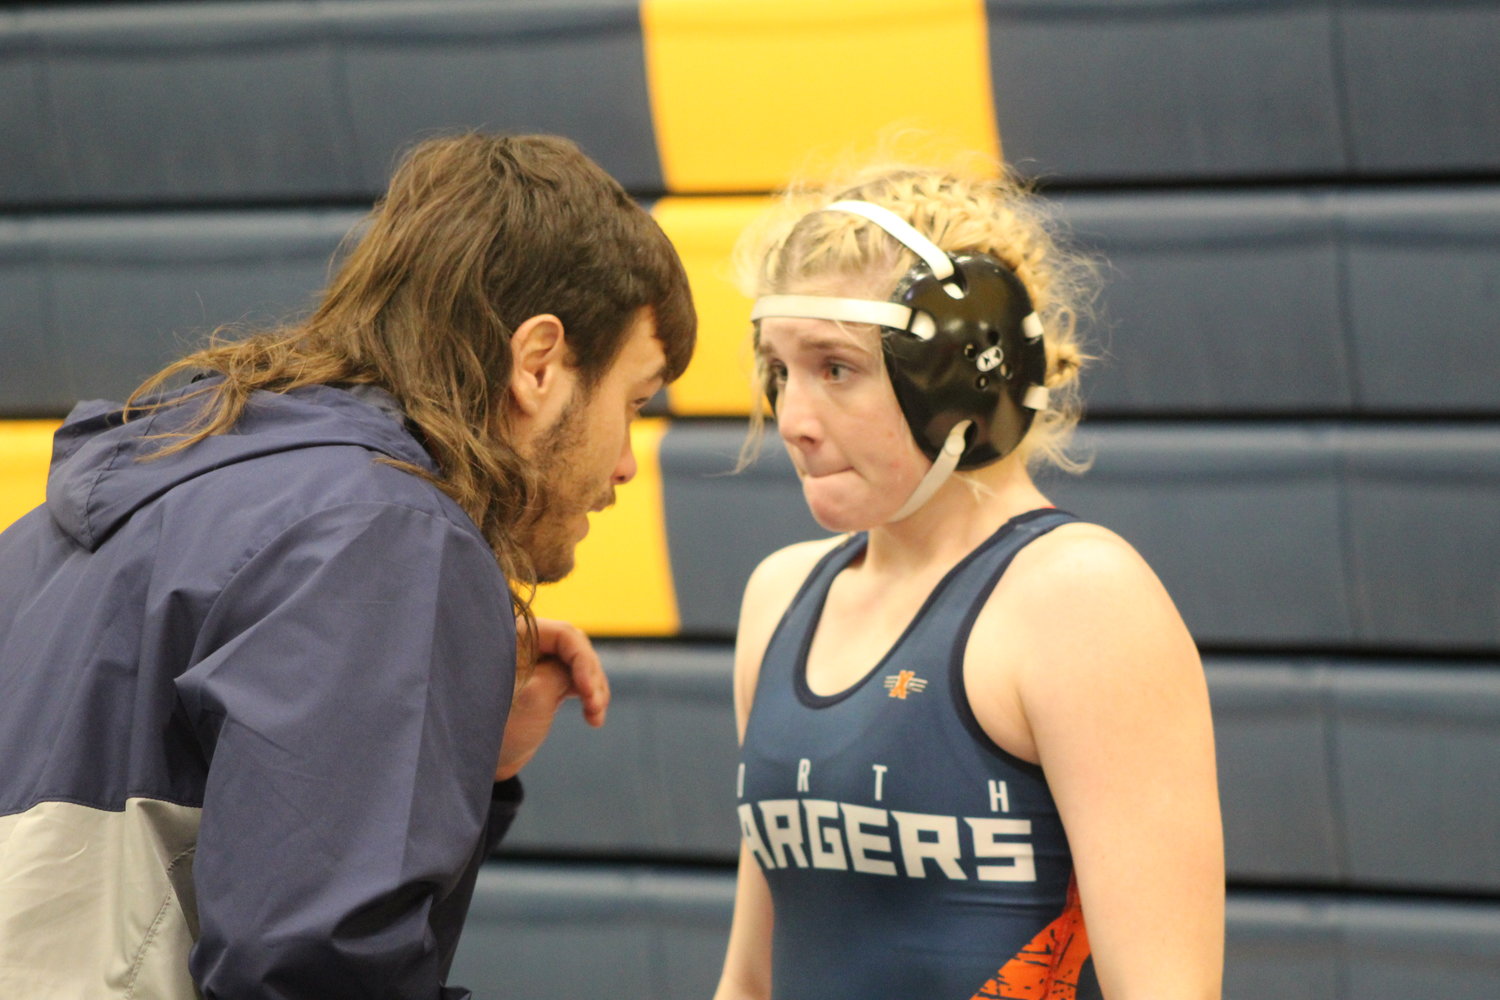 Charger assistant coach Trizton Carson gives Moffit a pep talk before her match.